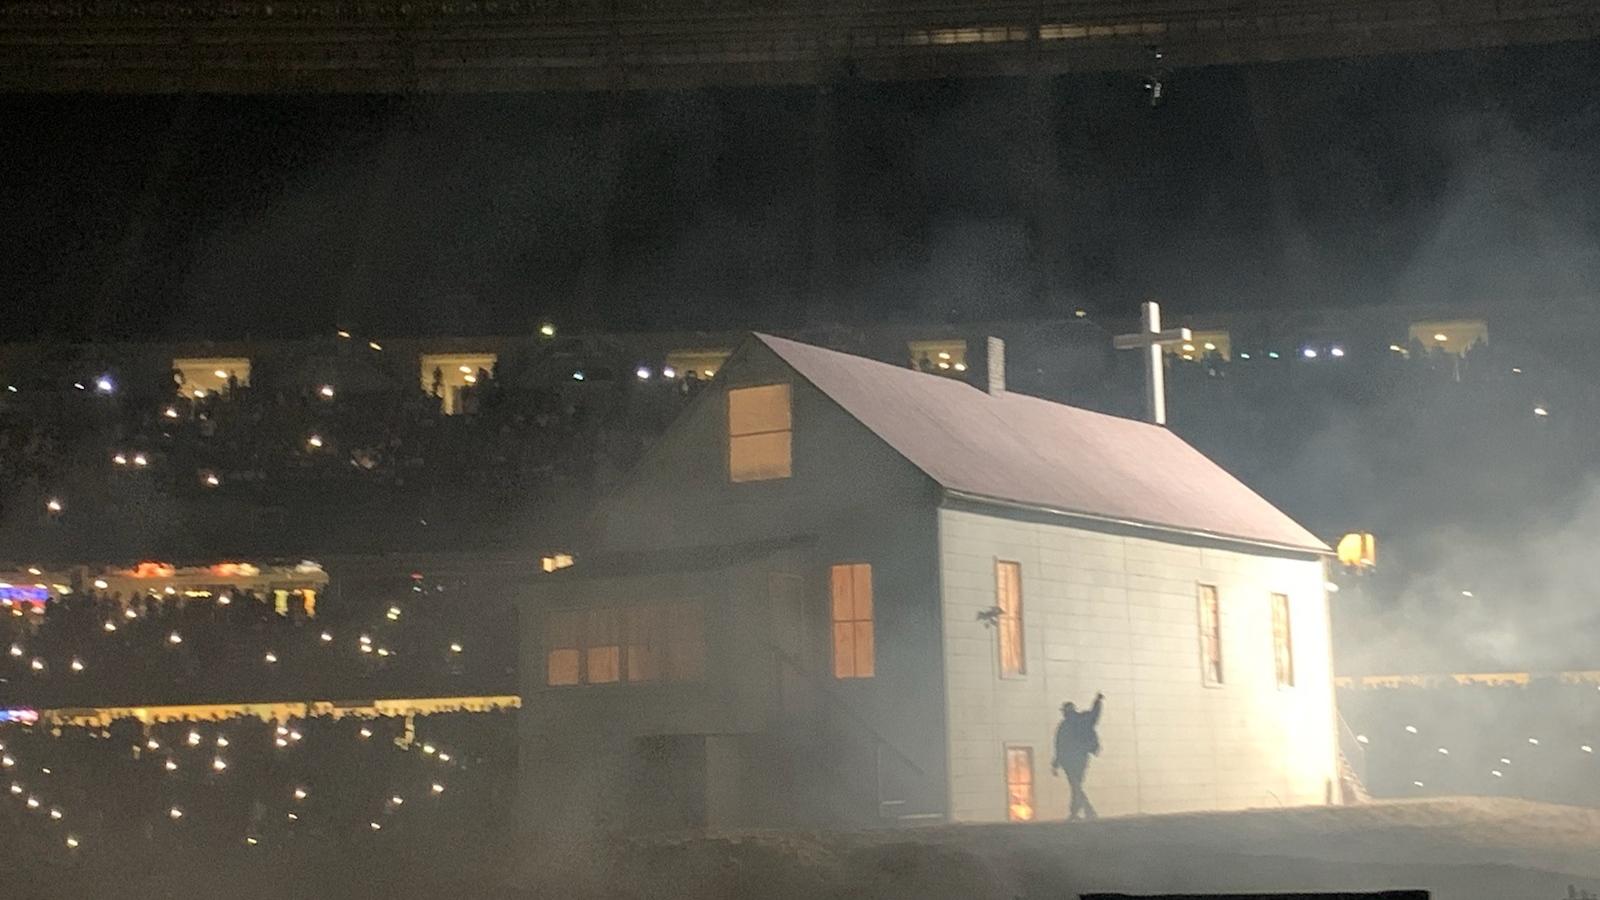 Kanye West’s “Donda” listening party at Soldier Field on Thursday, Aug. 26, 2021 included a replica of his childhood Evergreen Park home. (Angel Idowu / WTTW News)